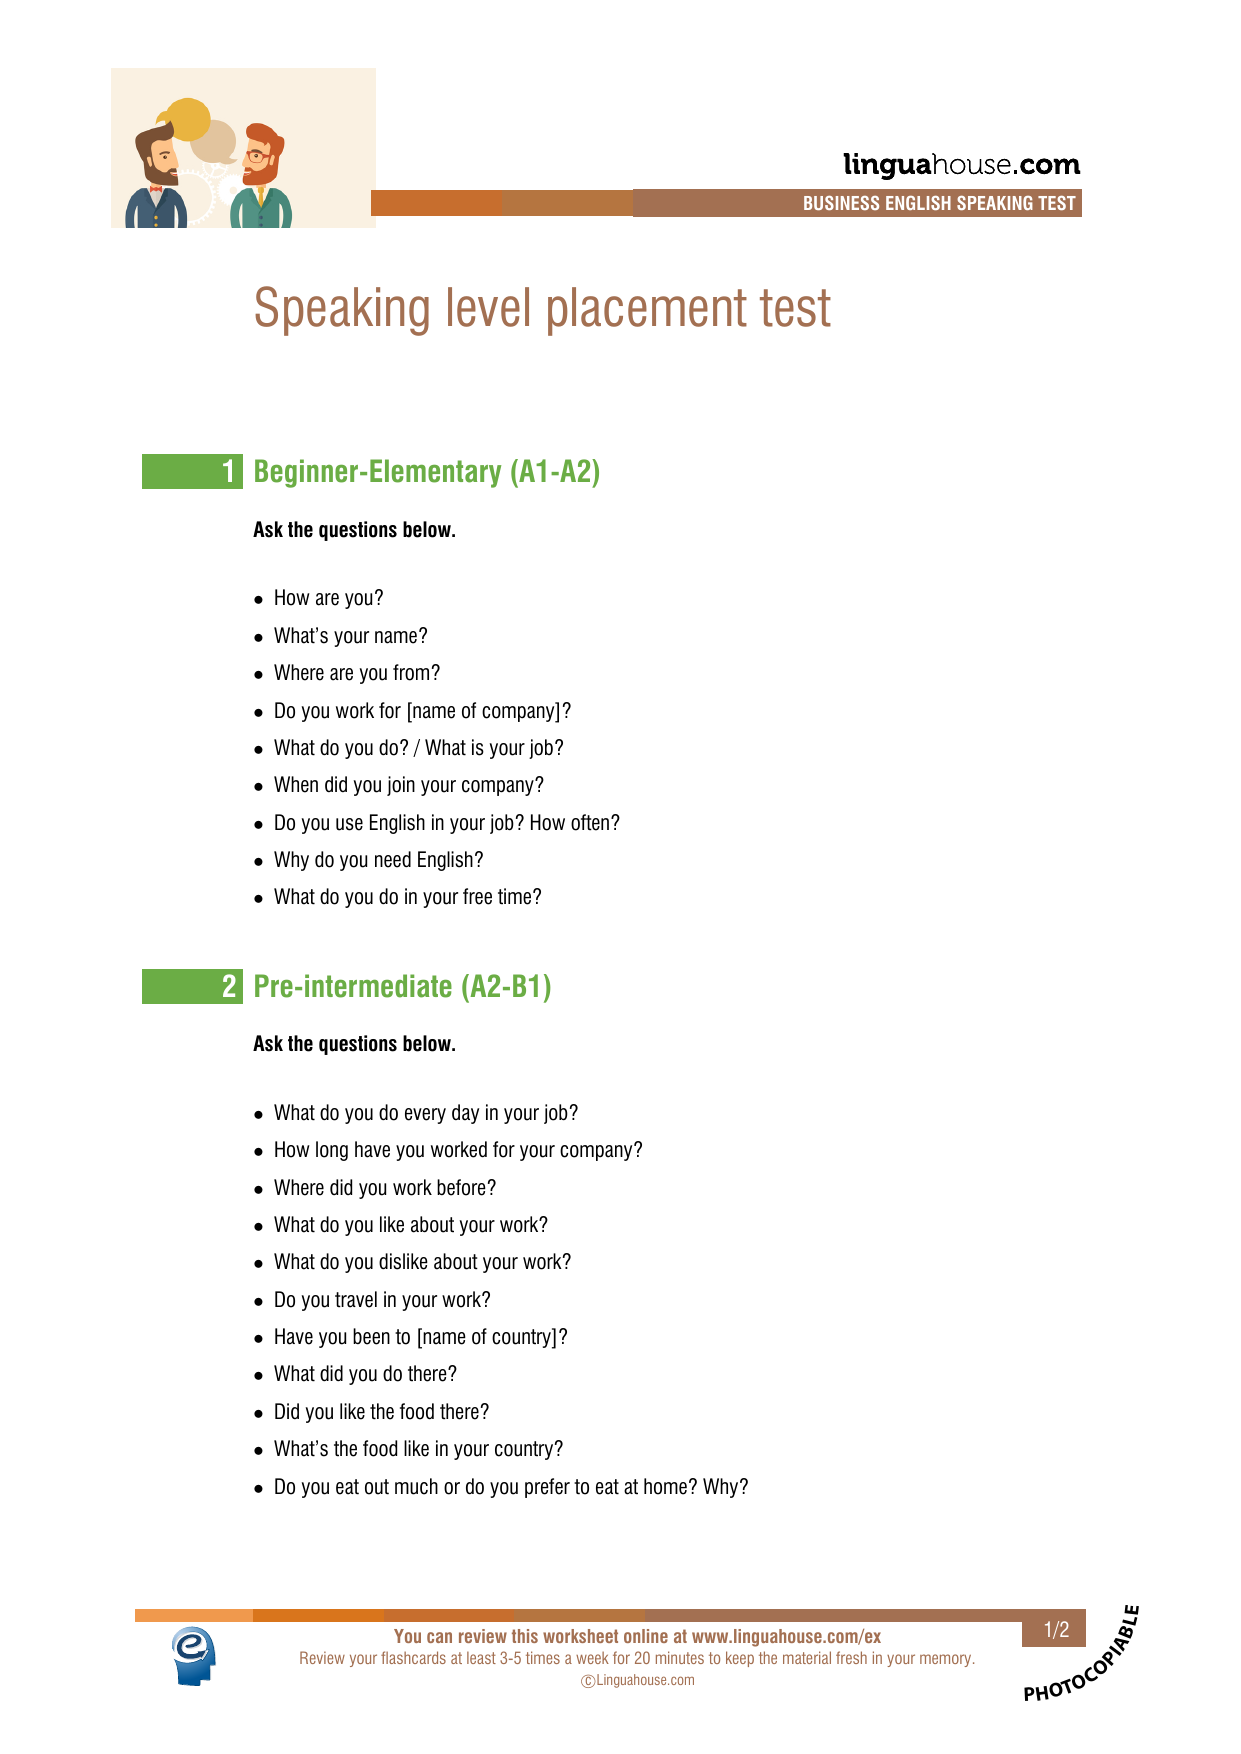 speaking-level-placement-test-business-english